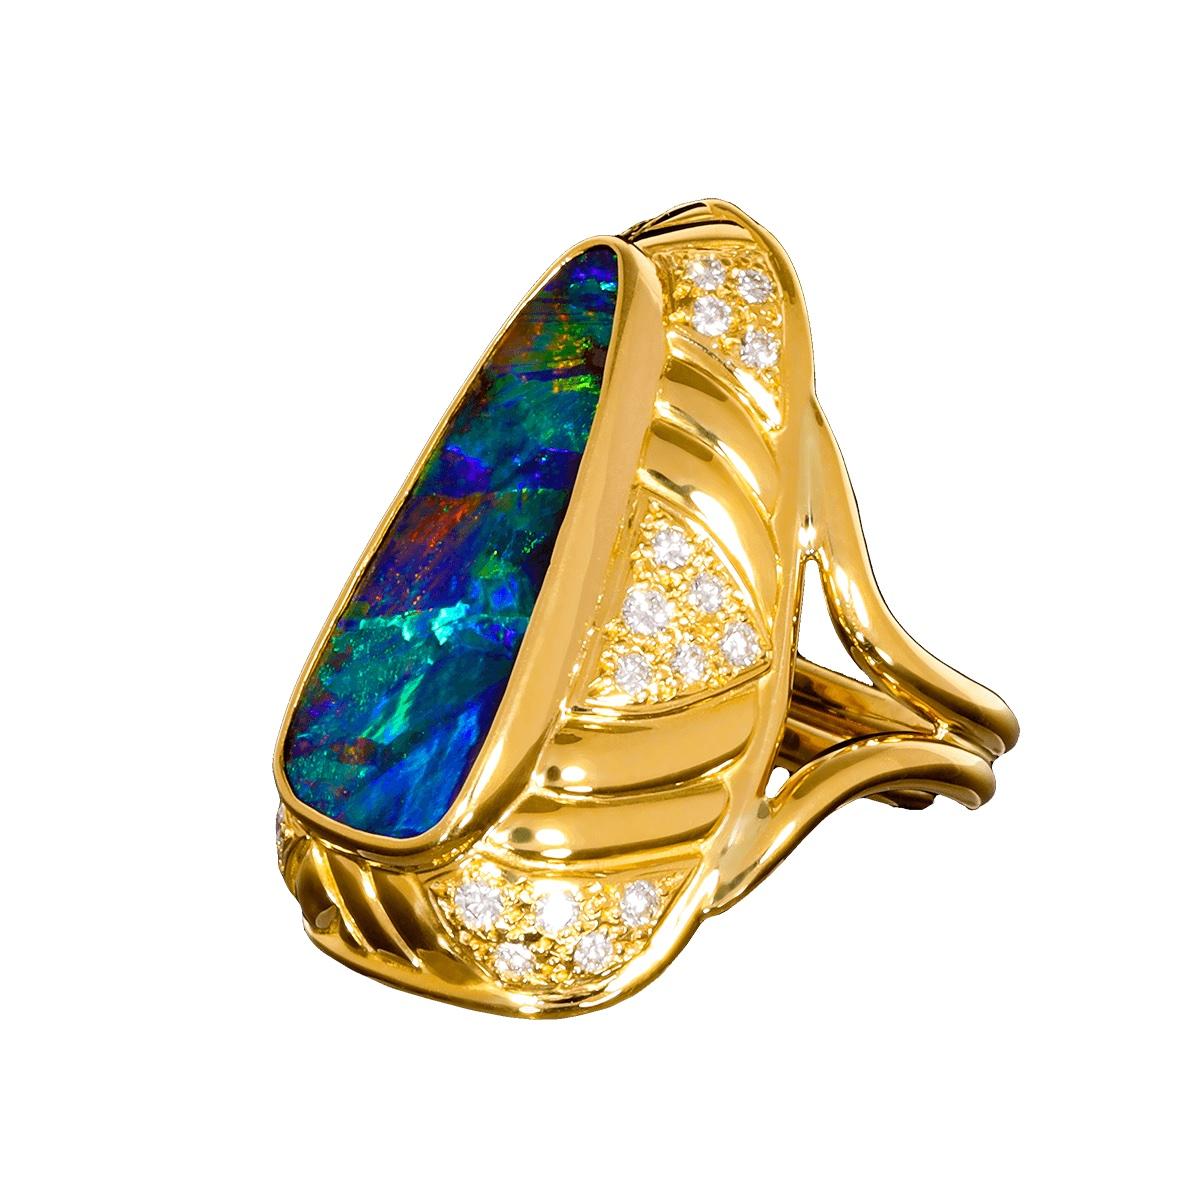 This amazing boulder opal is the best gem opal we have ever had in a ring. It has outstanding clarity with crisp sharp colours and patterns without equal.

The block harlequin pattern is overlaid with a broad flash and chaff patterns in truly